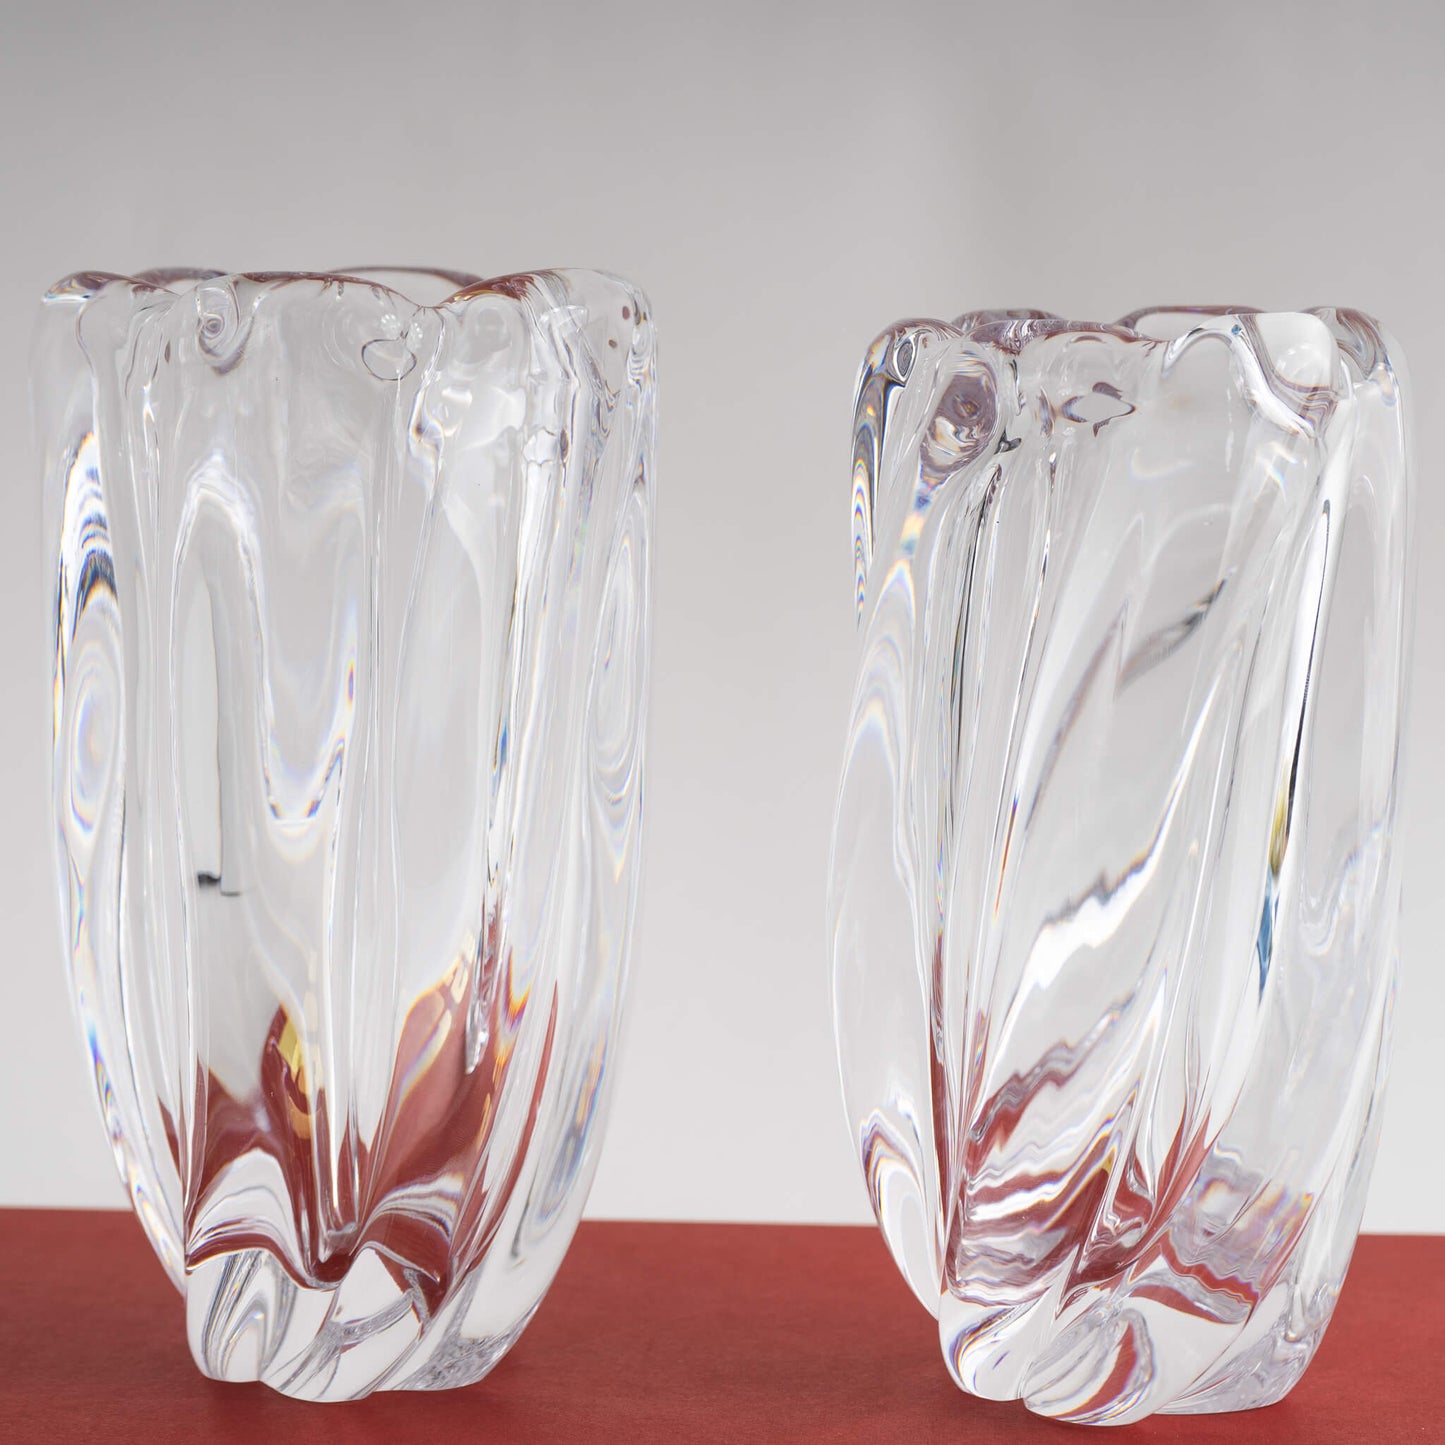 Vintage Orrefors Crystal Tall Waterfall Vase by Edvin Ohrstrom - A Pair